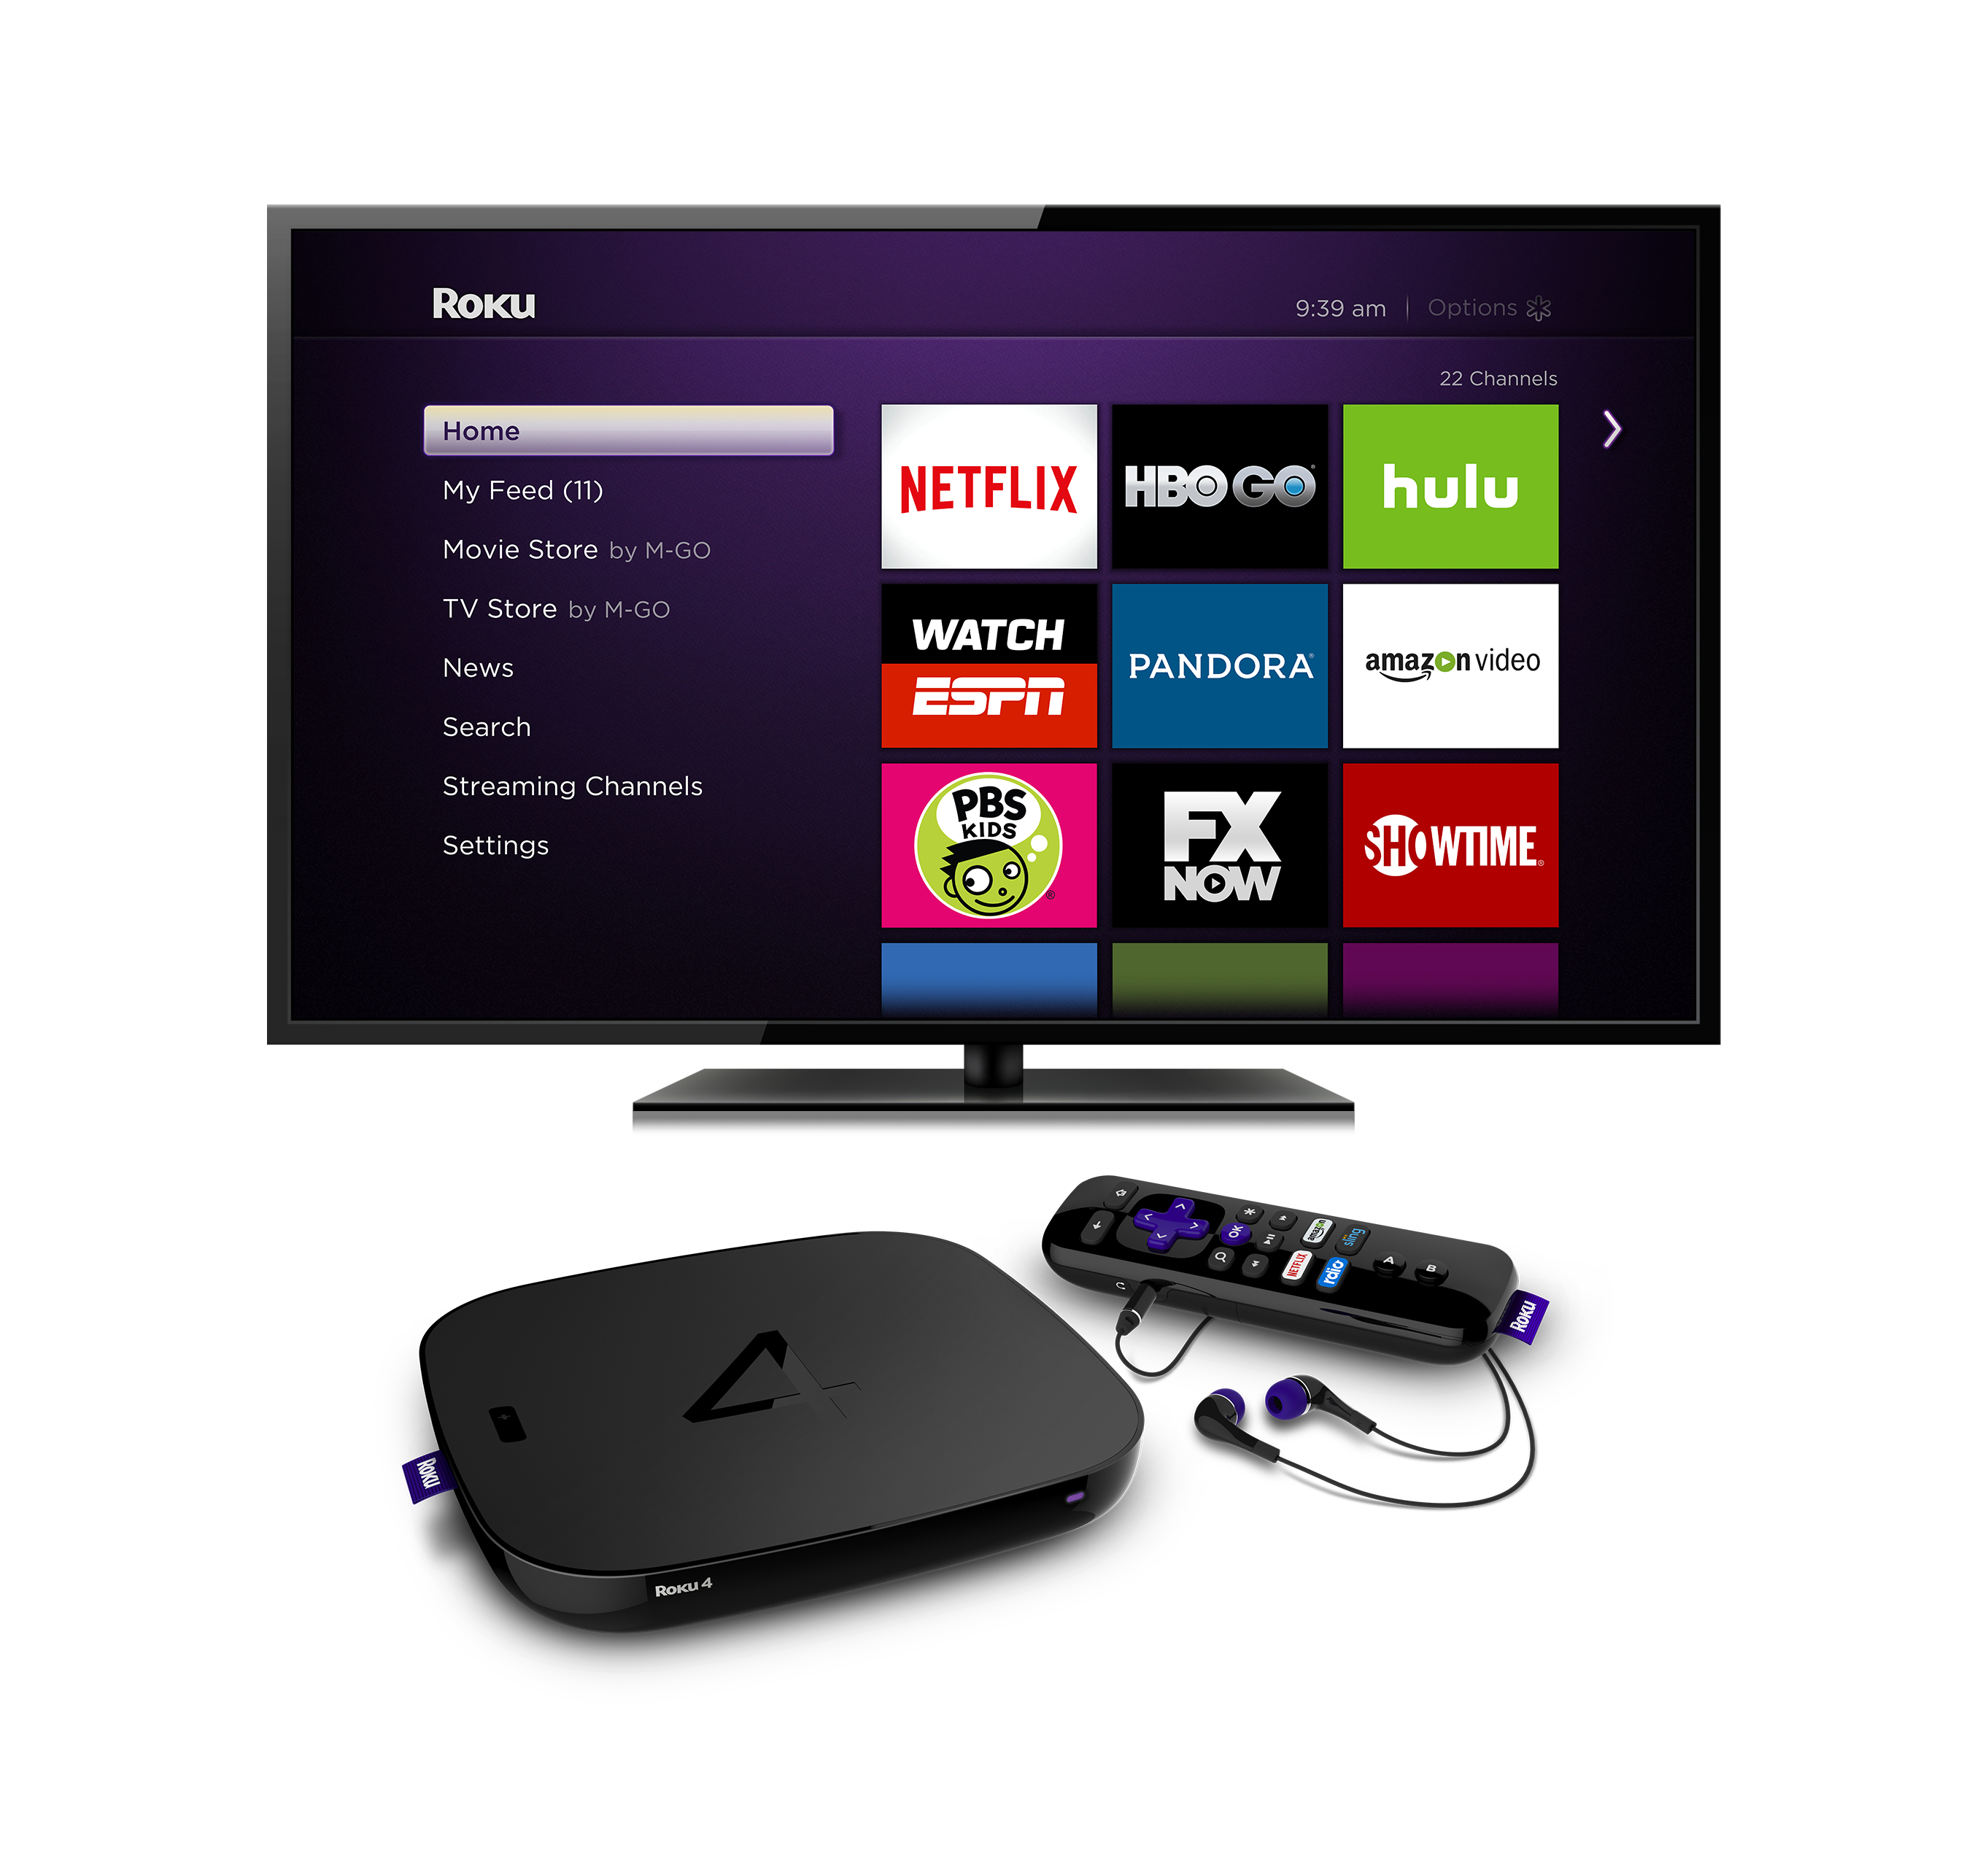 Roku Streaming Stick 4K is a great companion for your first 4K TV